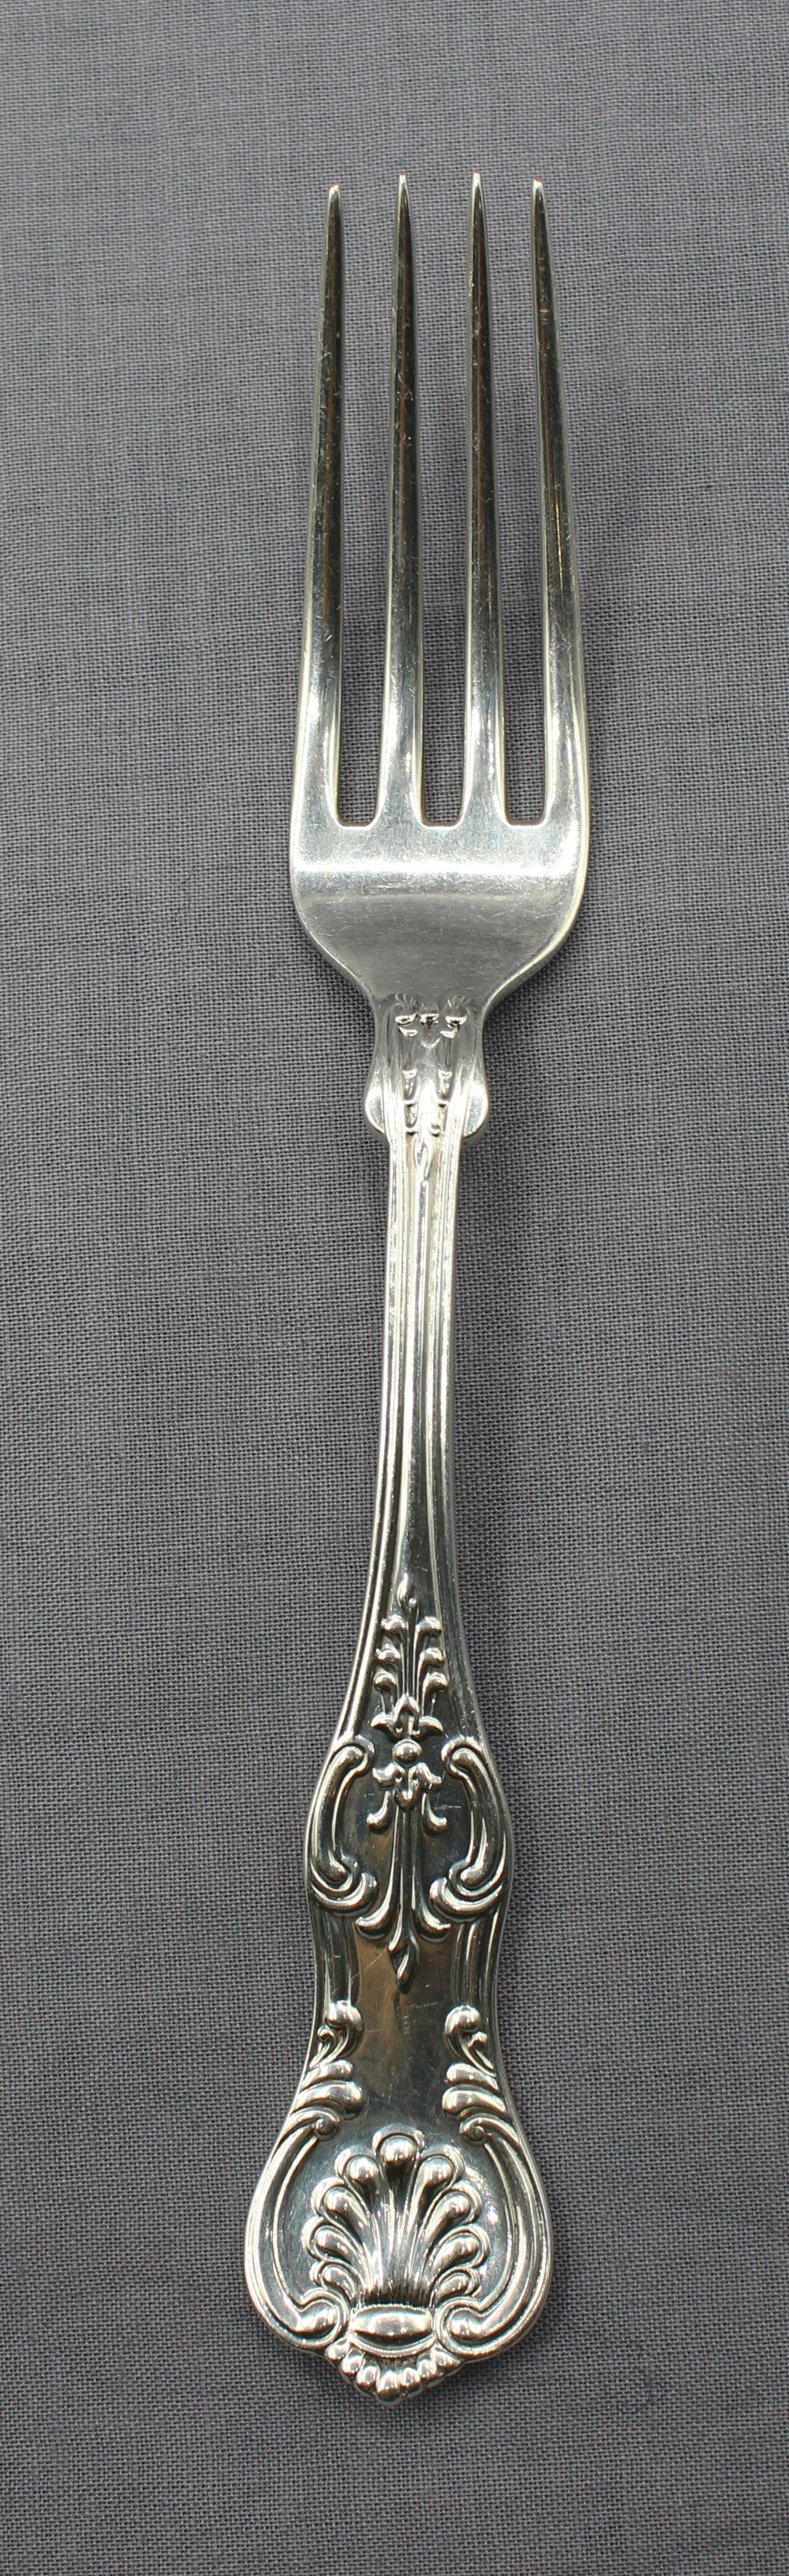 Rococo Revival Late 19th Century Matched Set of 10 Sterling Silver Luncheon Forks